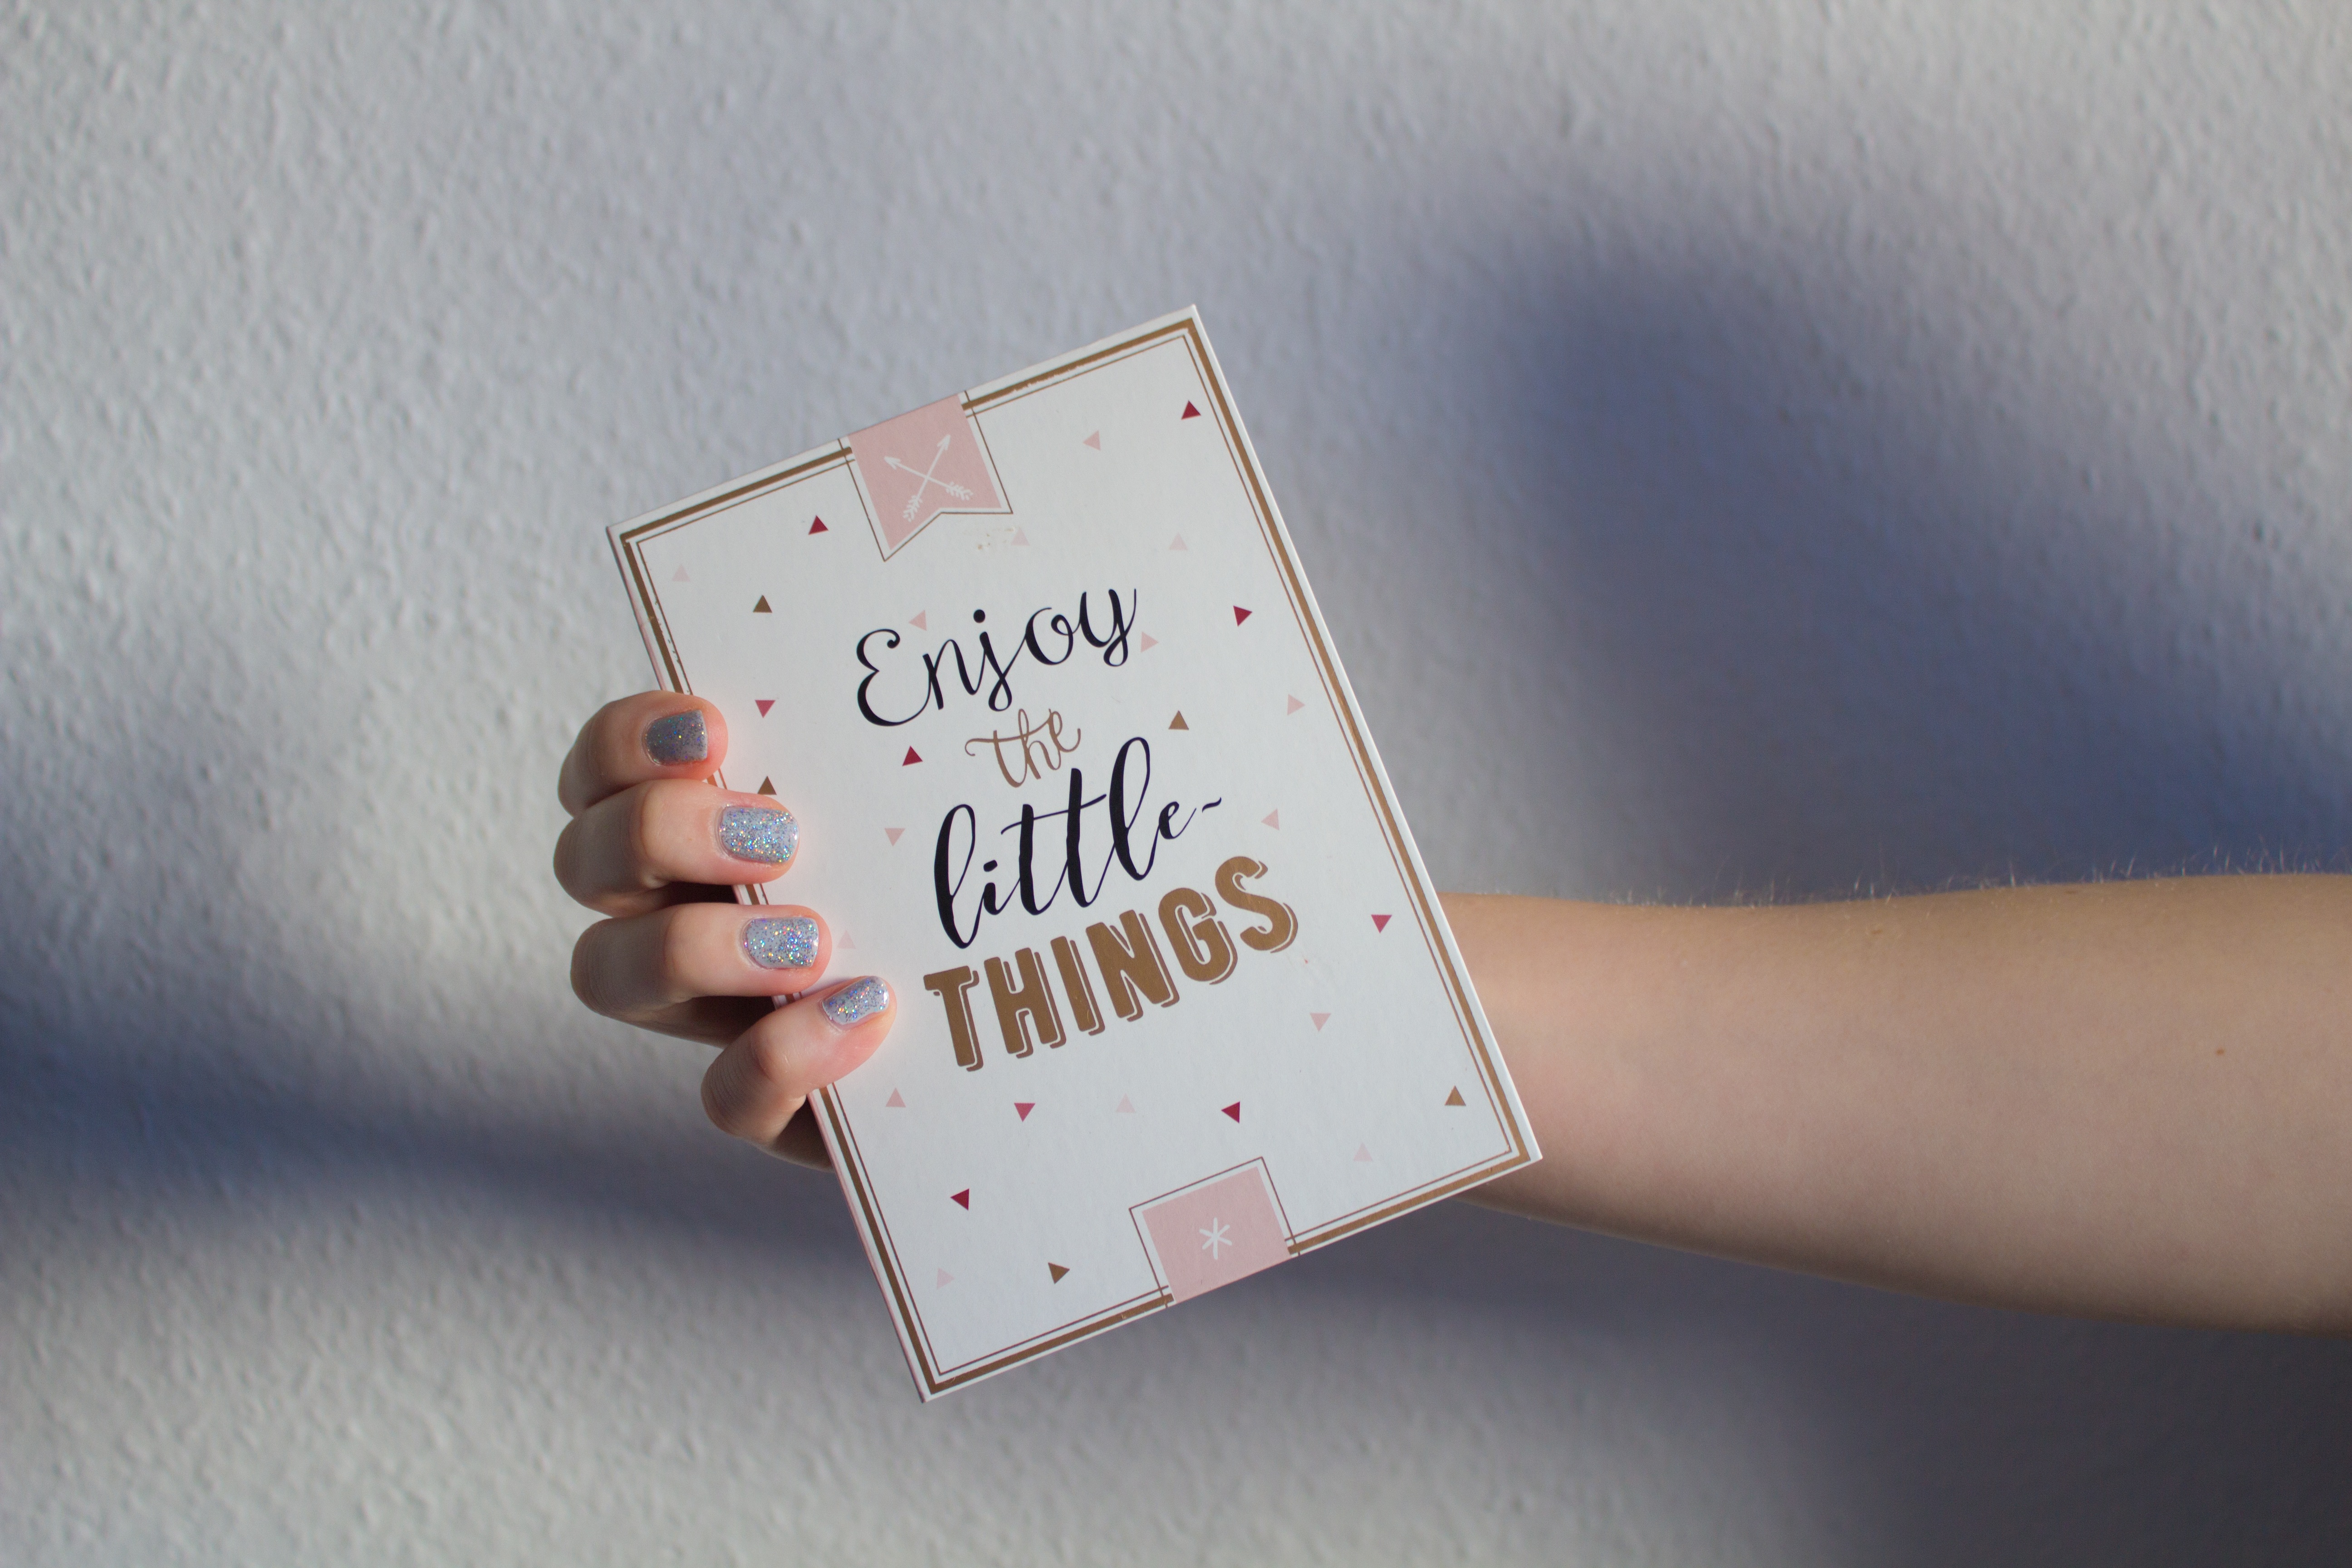 Are you enjoying the book. Little things. The little things of Life.